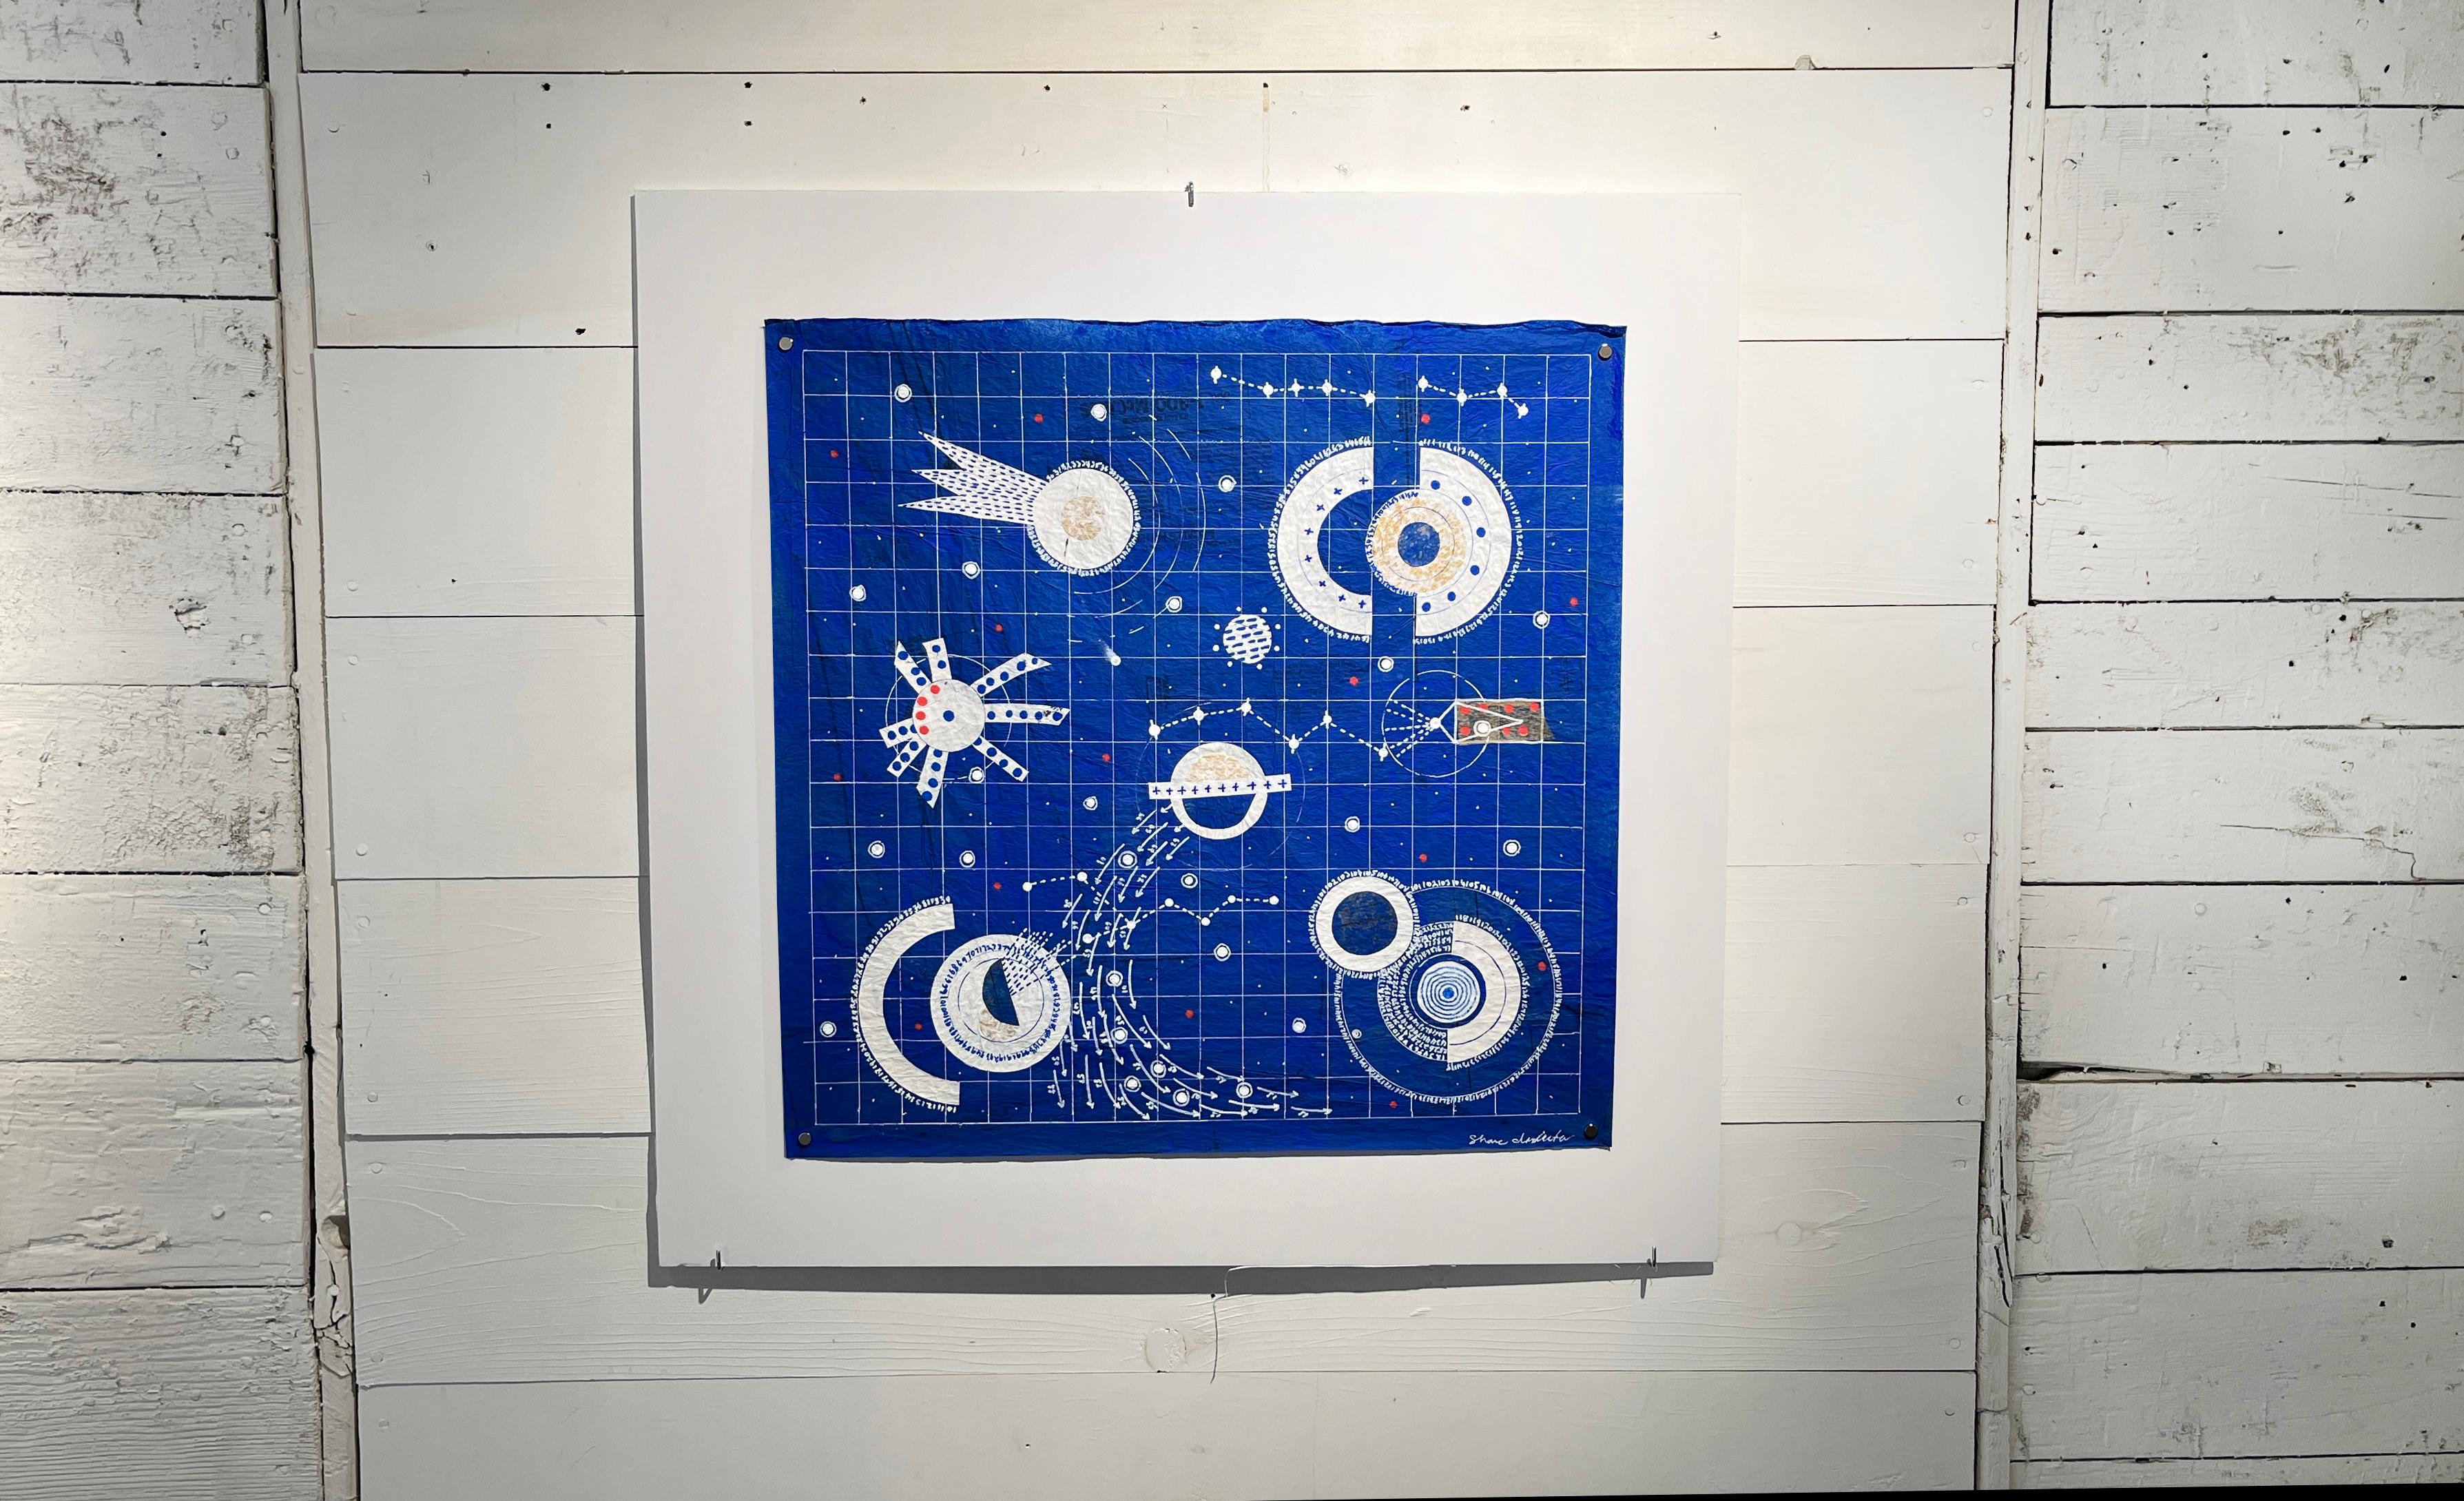 Tasmanian-born artist Shane Drinkwater harnesses his interest in ancient manuscripts, cartography and astronomy to produce abstract artworks of mystery and beauty. All of his artworks are Untitled and measure approximately 20x20